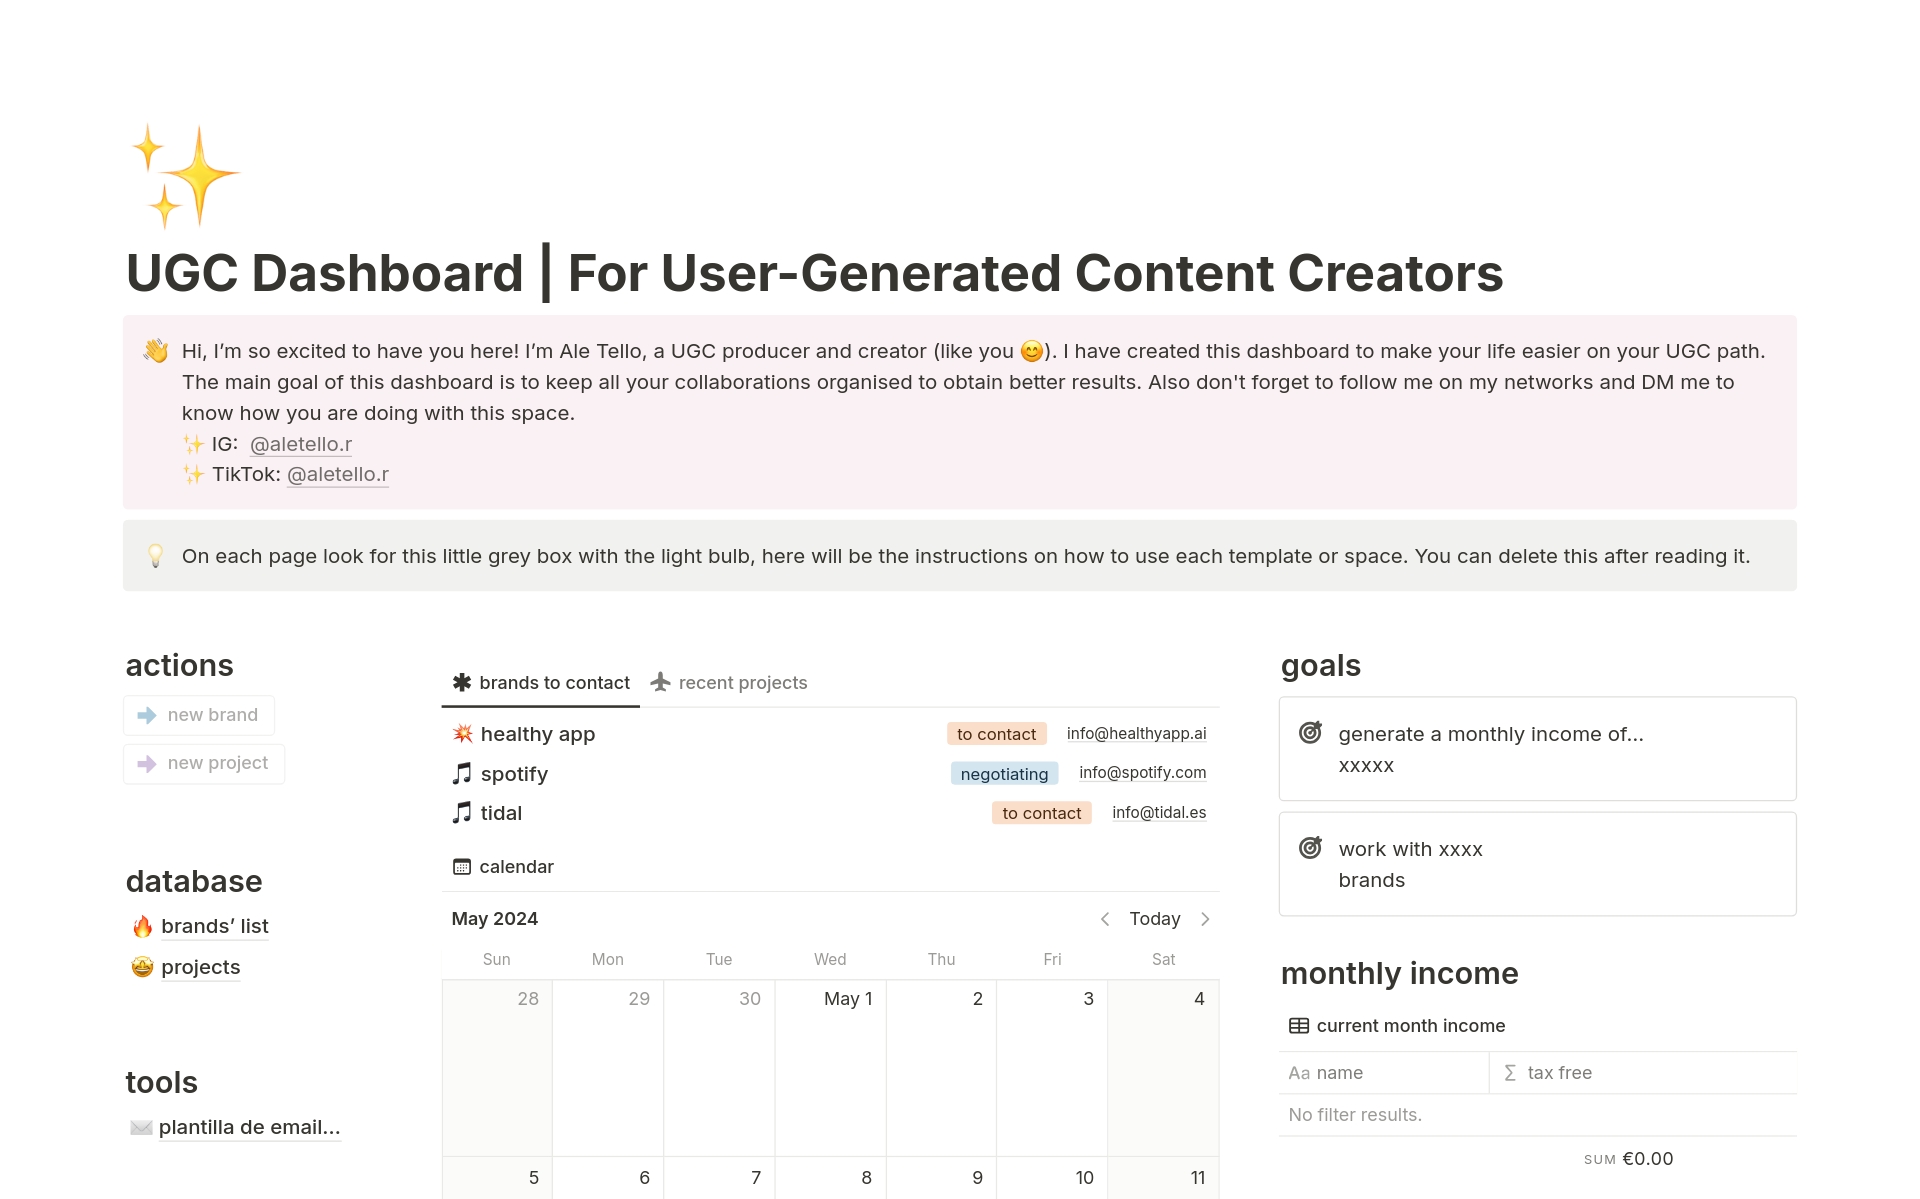 This UGC creator's dream template keeps you organized and thriving. Plan your content with a dedicated calendar, track income with ease, manage brand partnerships seamlessly, and ensure all projects stay on track. Focus on creating stellar content while this template empowers you